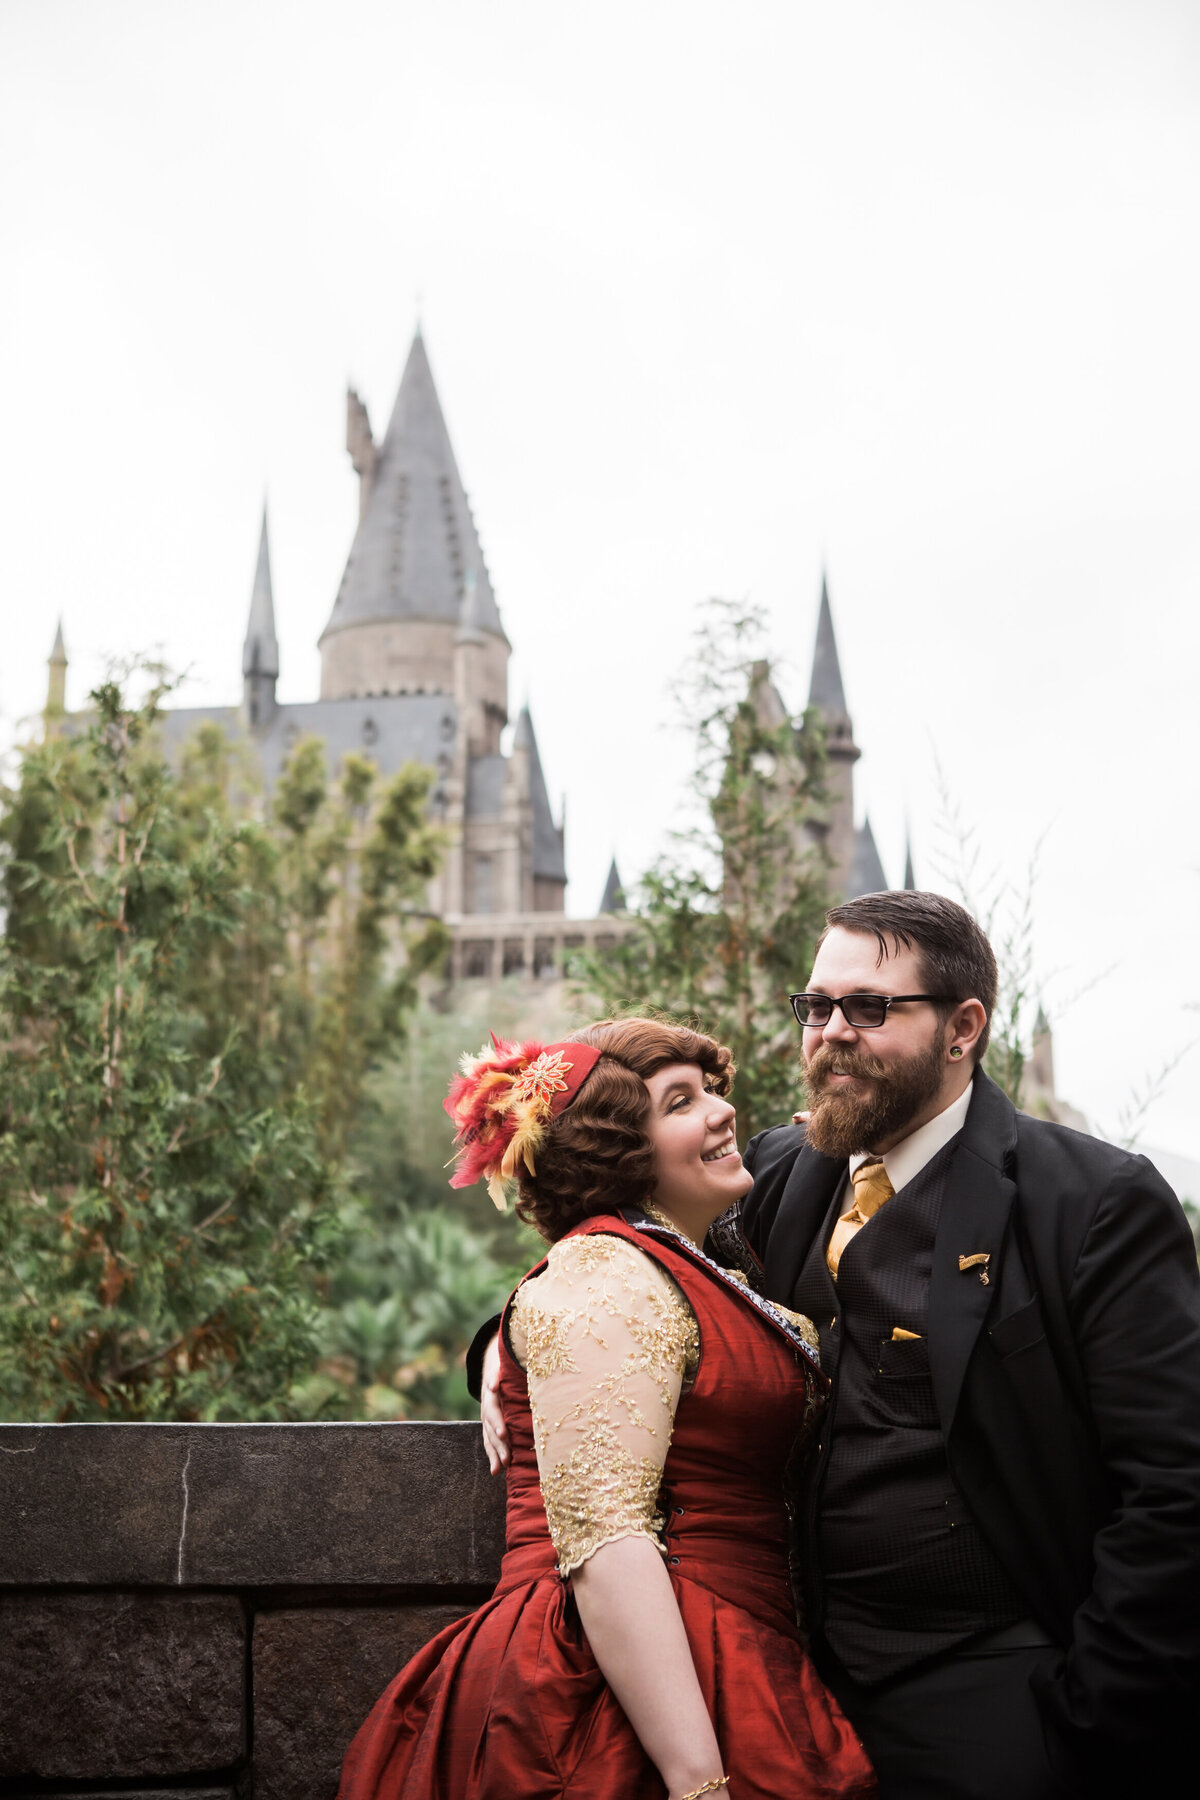 Fantasy wizarding inspired wedding couple in front of a castle.